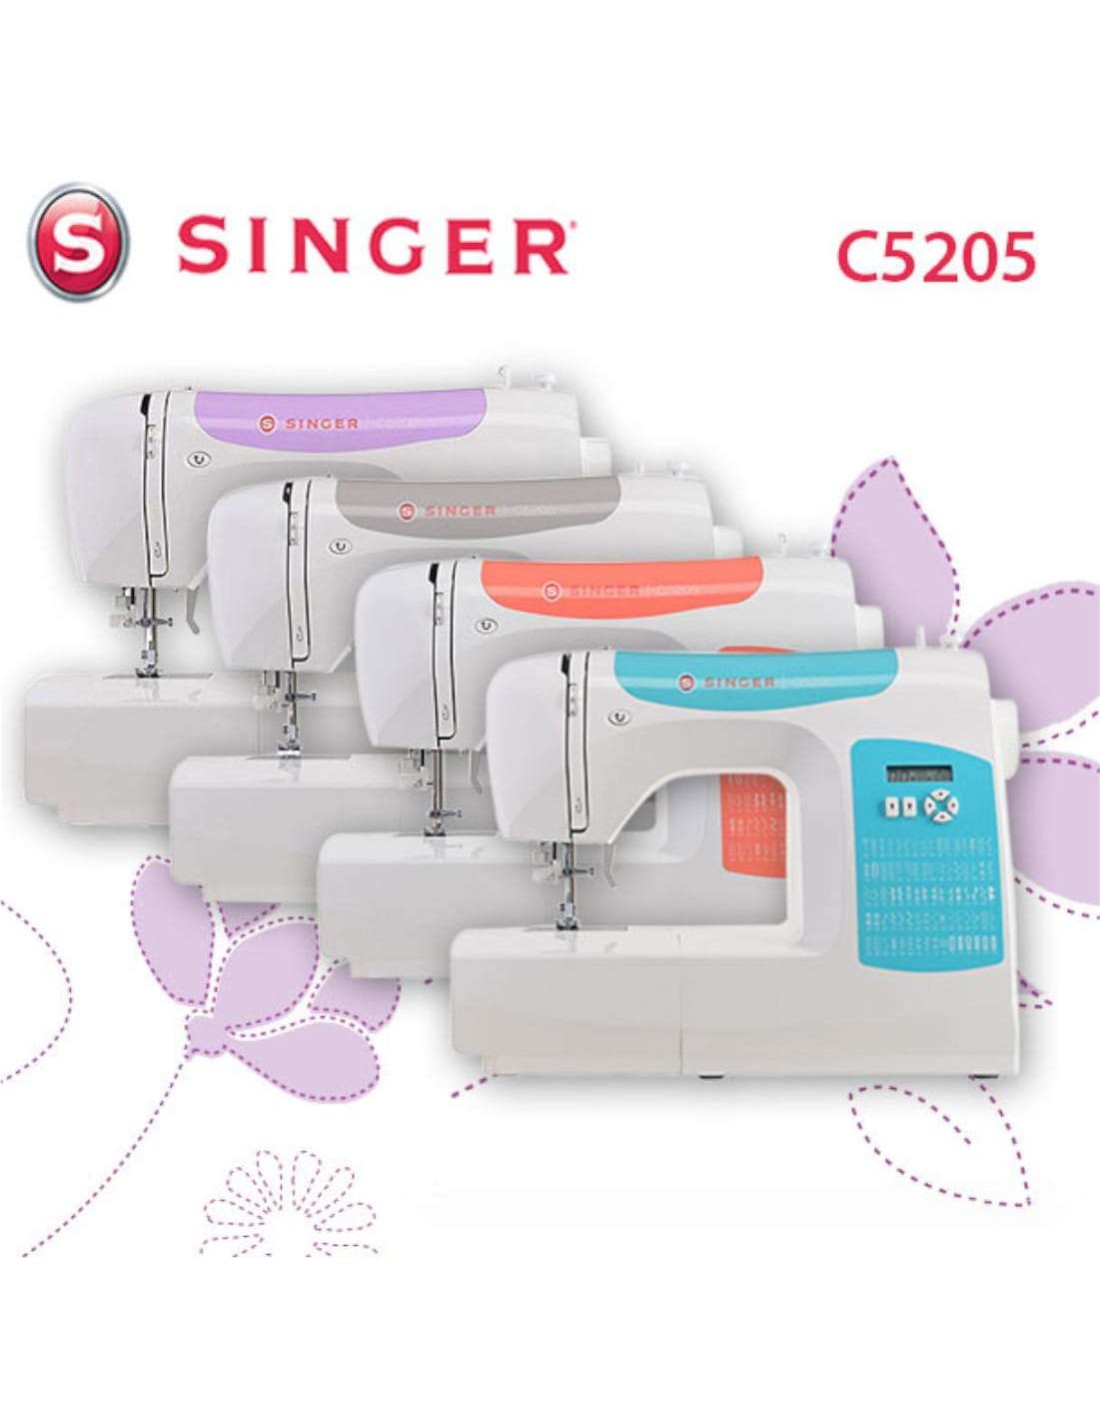 Computerized Singer Machine C5205 Sewing